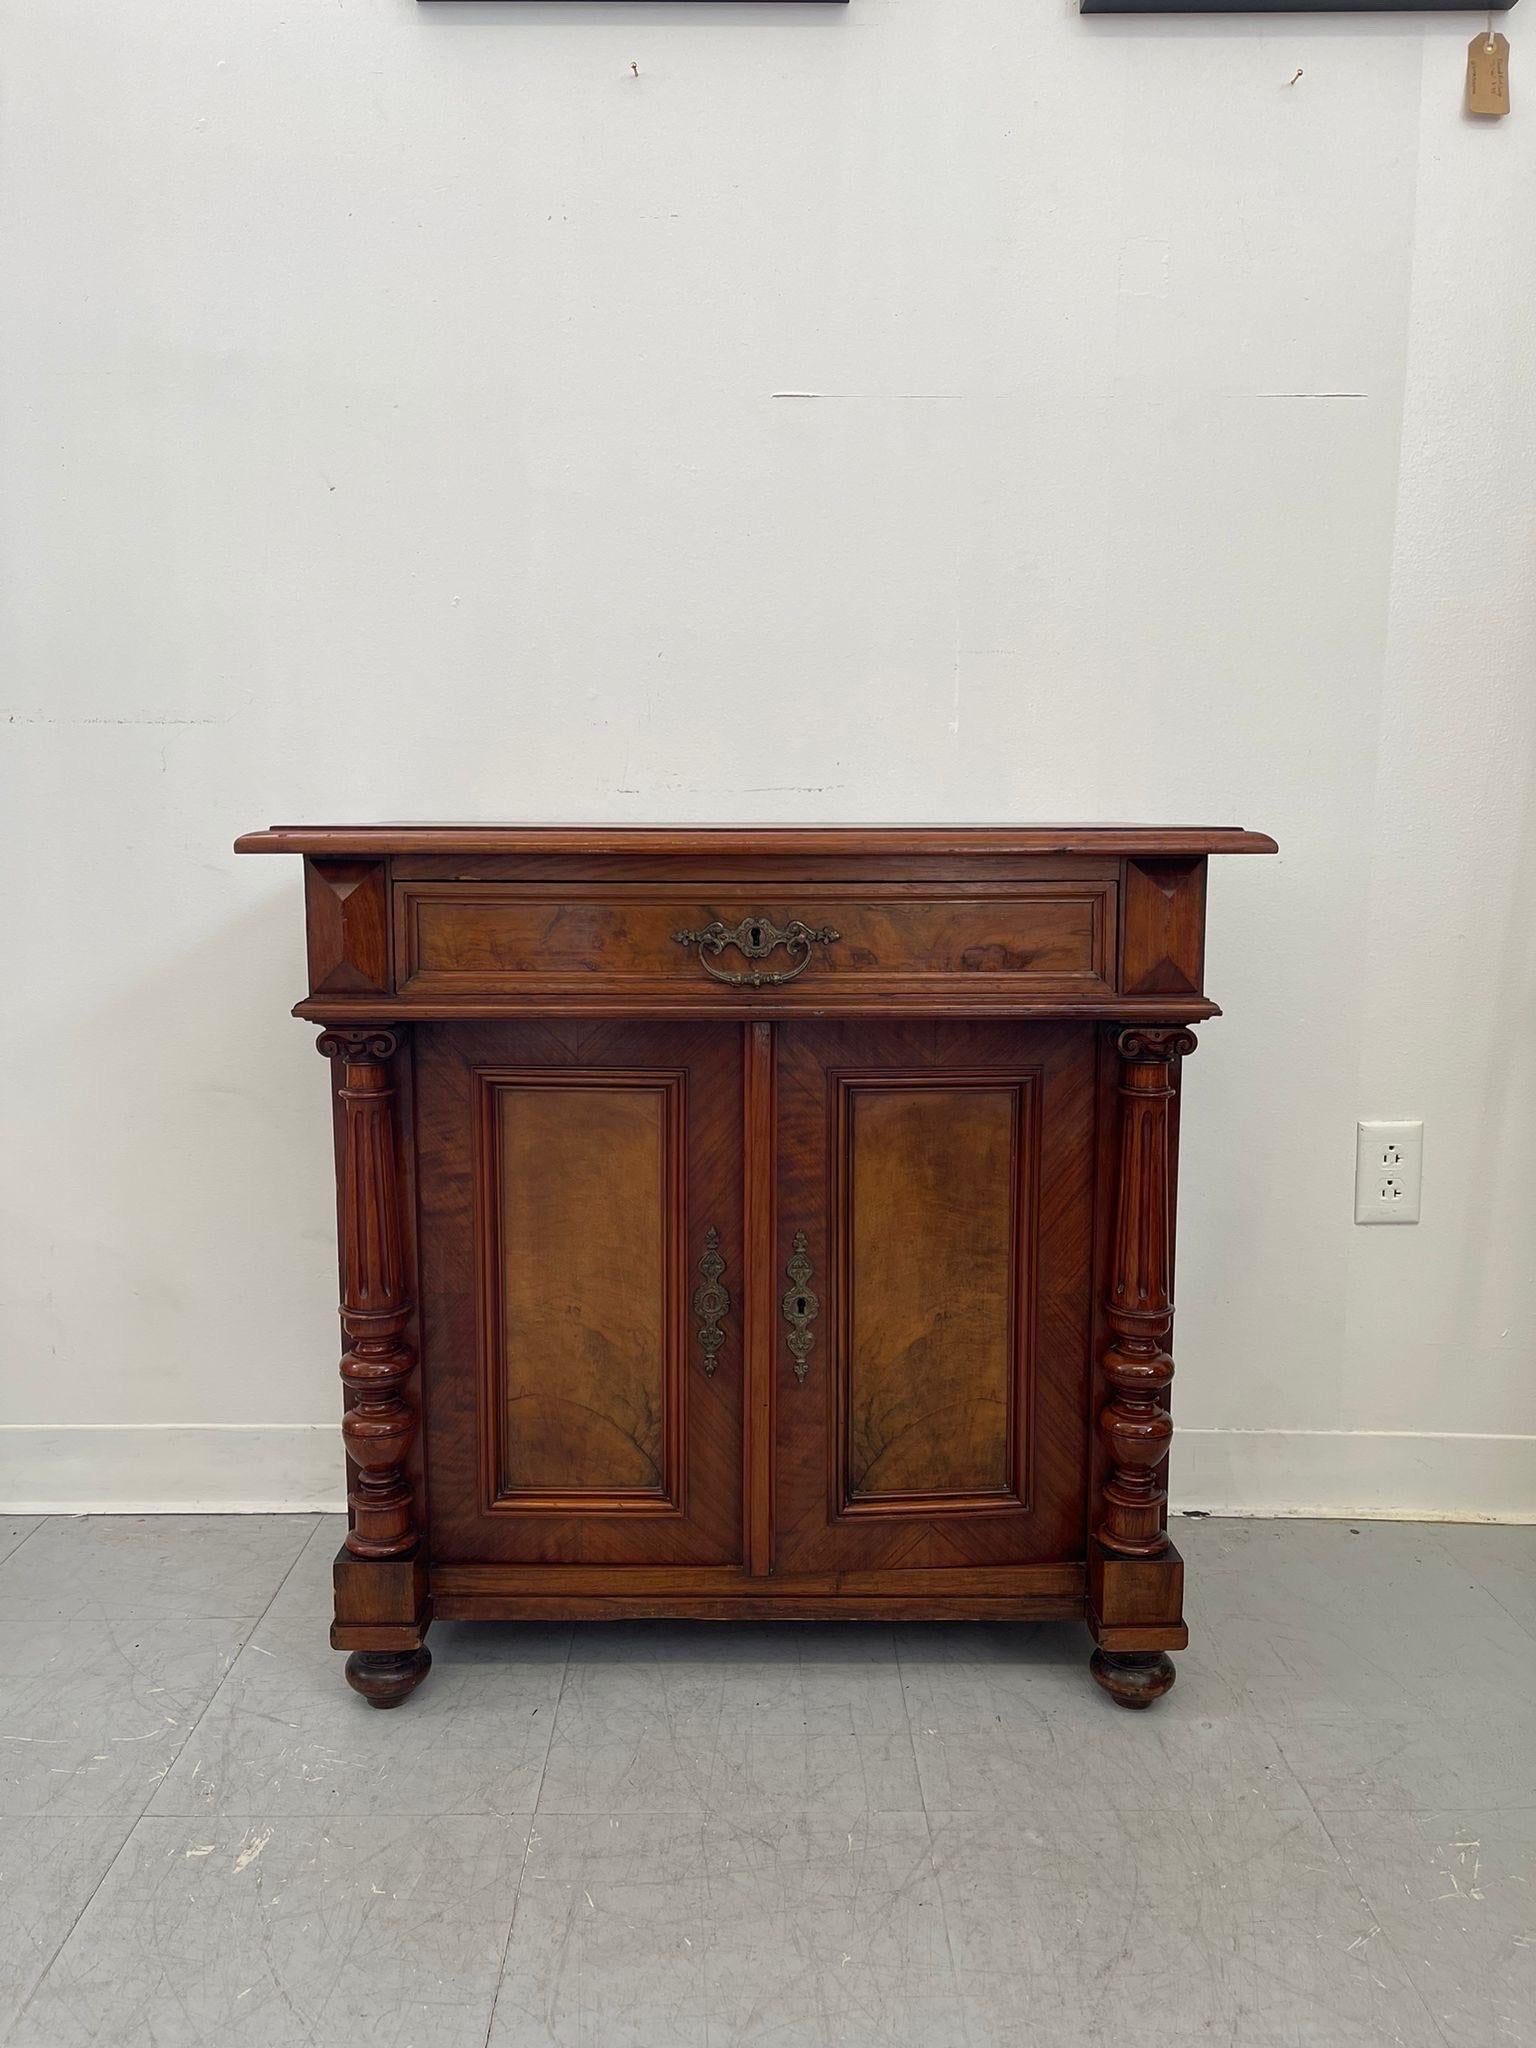 This side table with single dovetailed drawer above two door cabinet space. Carved wood detailing. Original hardware. Front two legs are tuned wood and has a unique shape. Vintage Condition Consistent with Age as Pictured.

Dimensions. 32 W ; 18 D ;